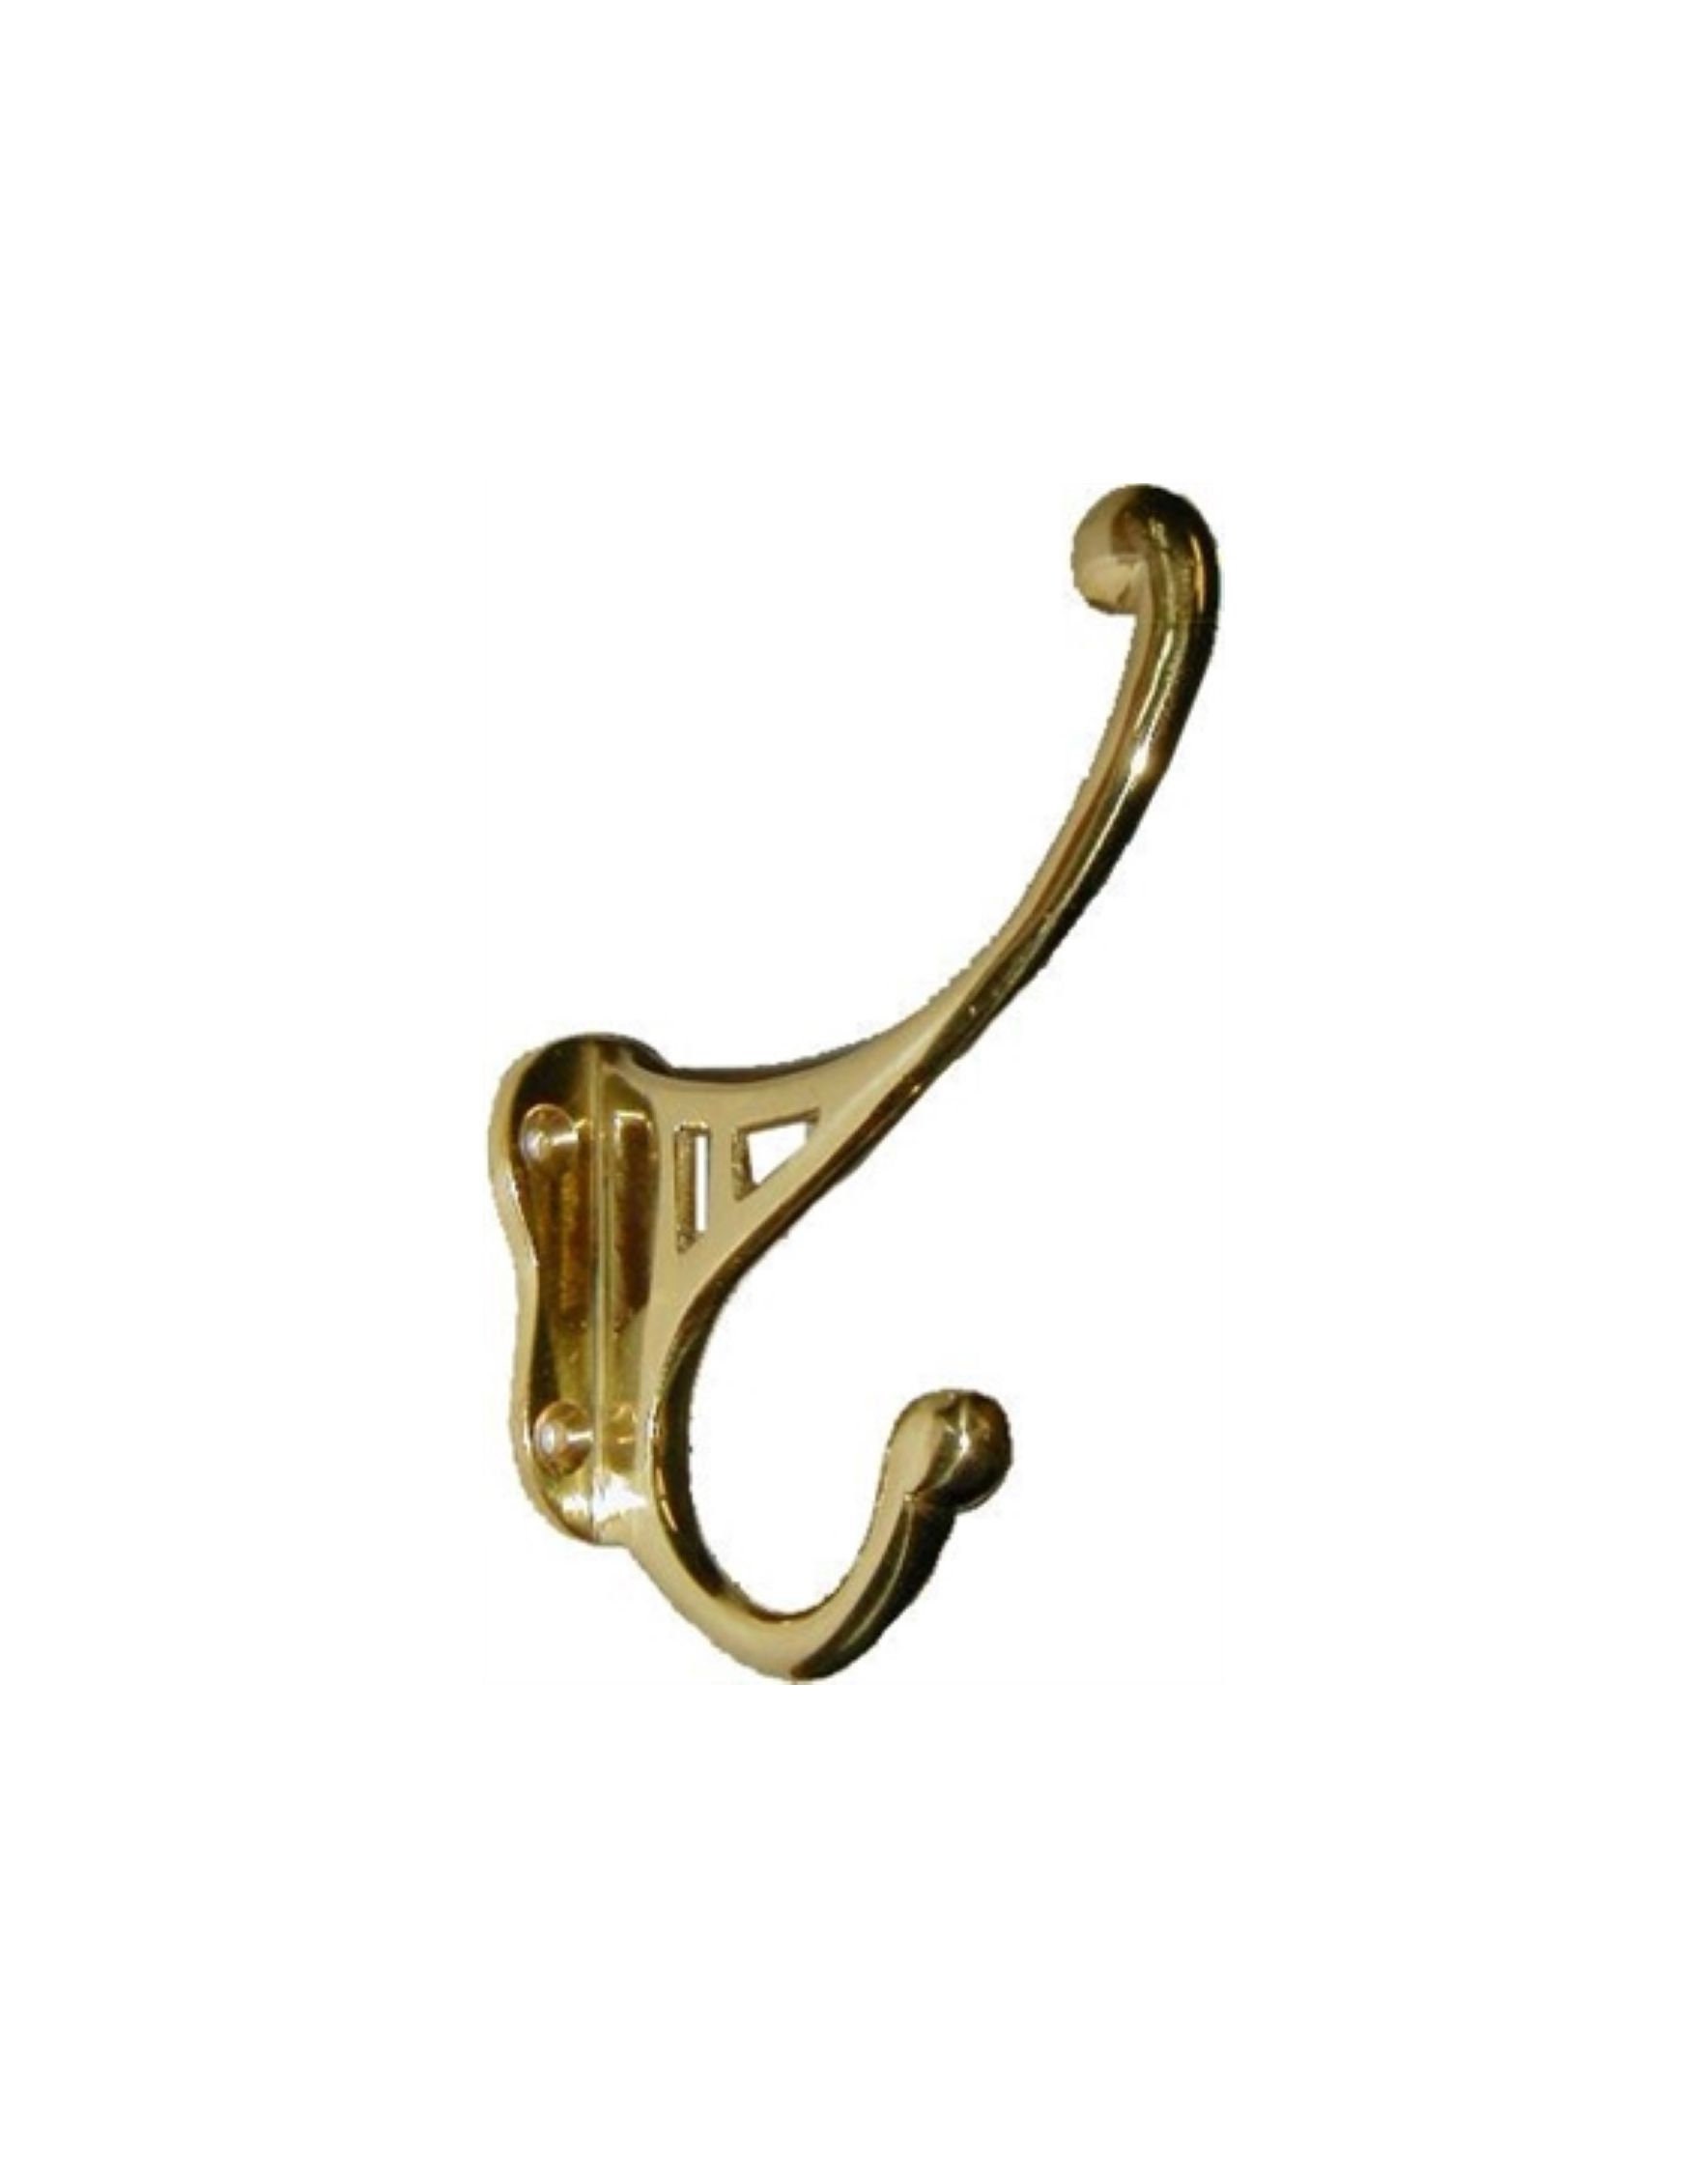 Paint is Blemished Hat Robe Hooks 10 Polished Brass Double Coat 